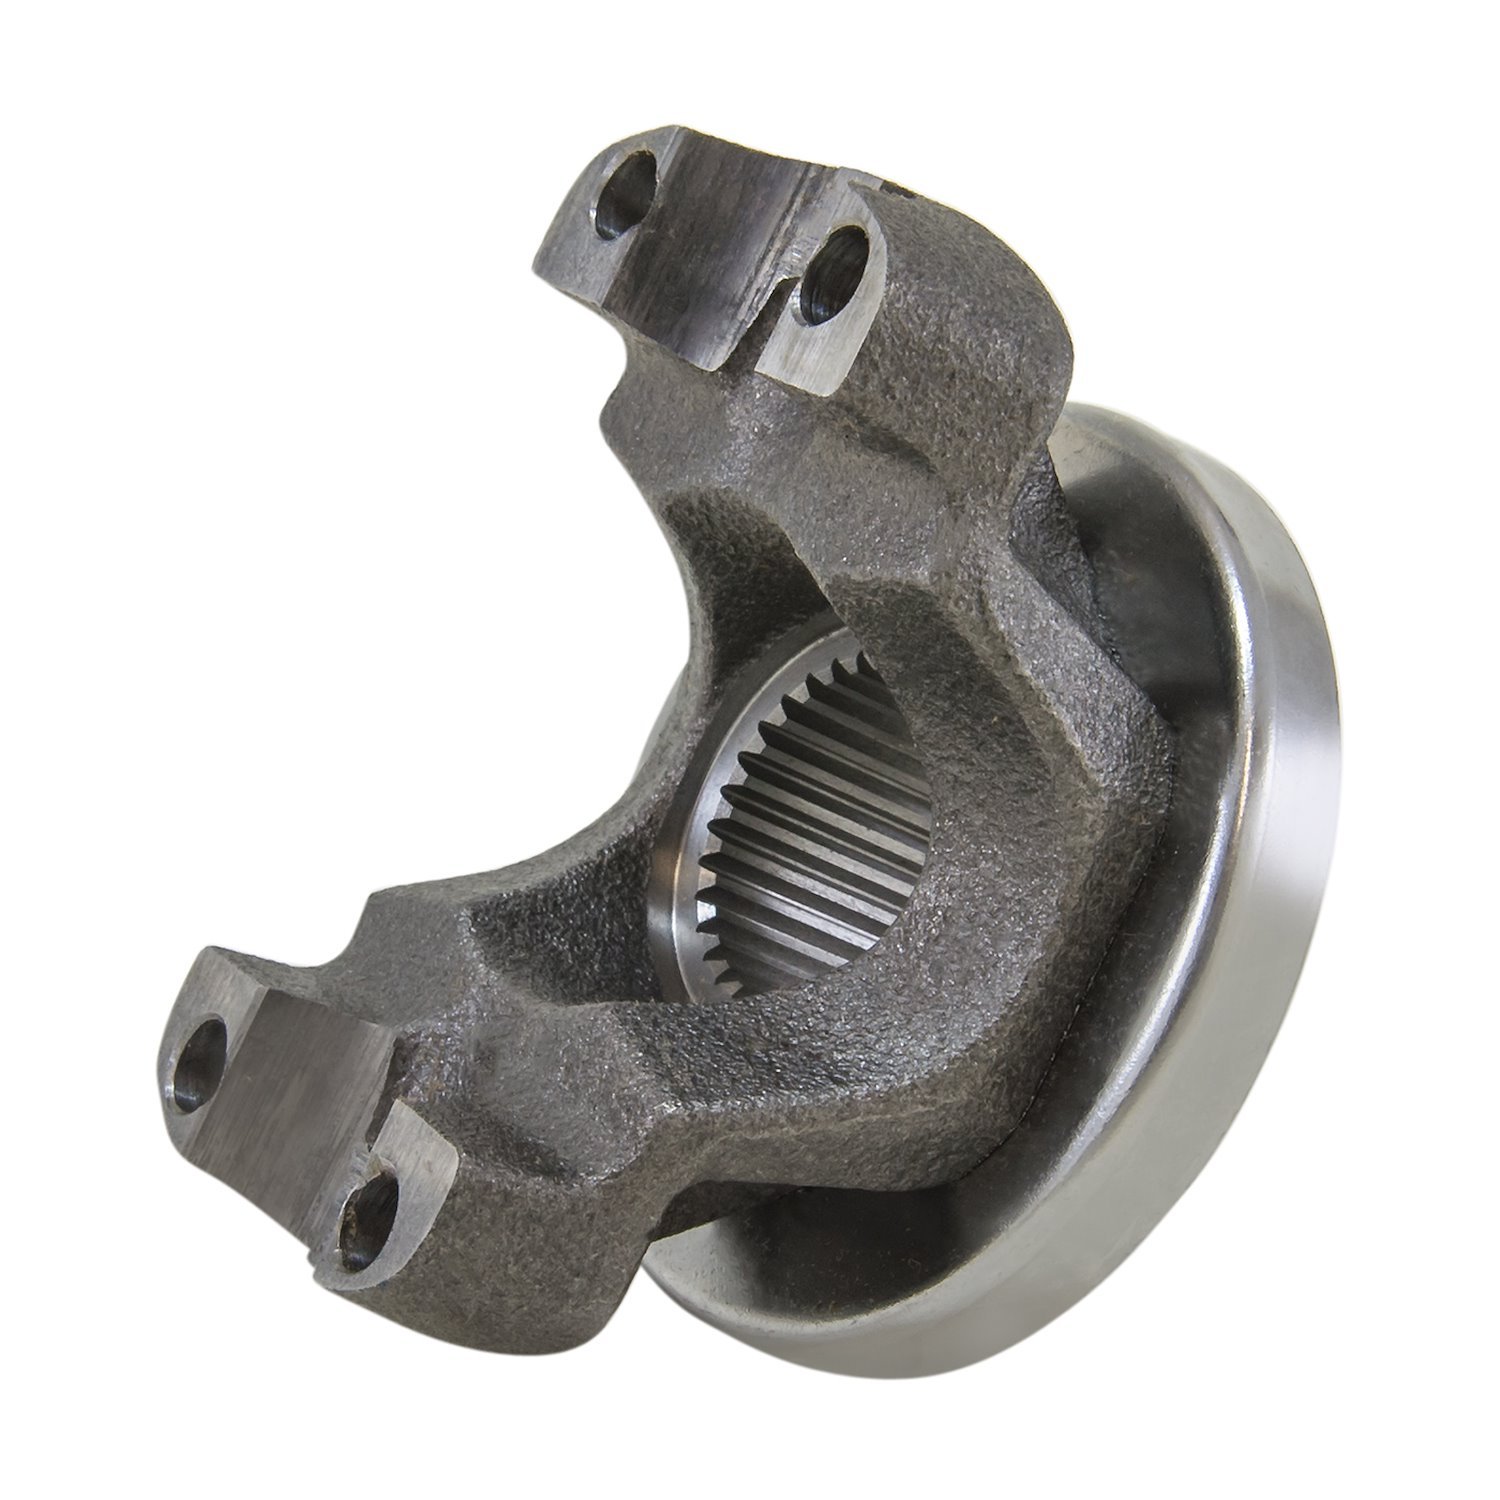 Replacement Yoke For Dana 30, 44, And 50 With 26 Spline And 1350 U-Joint